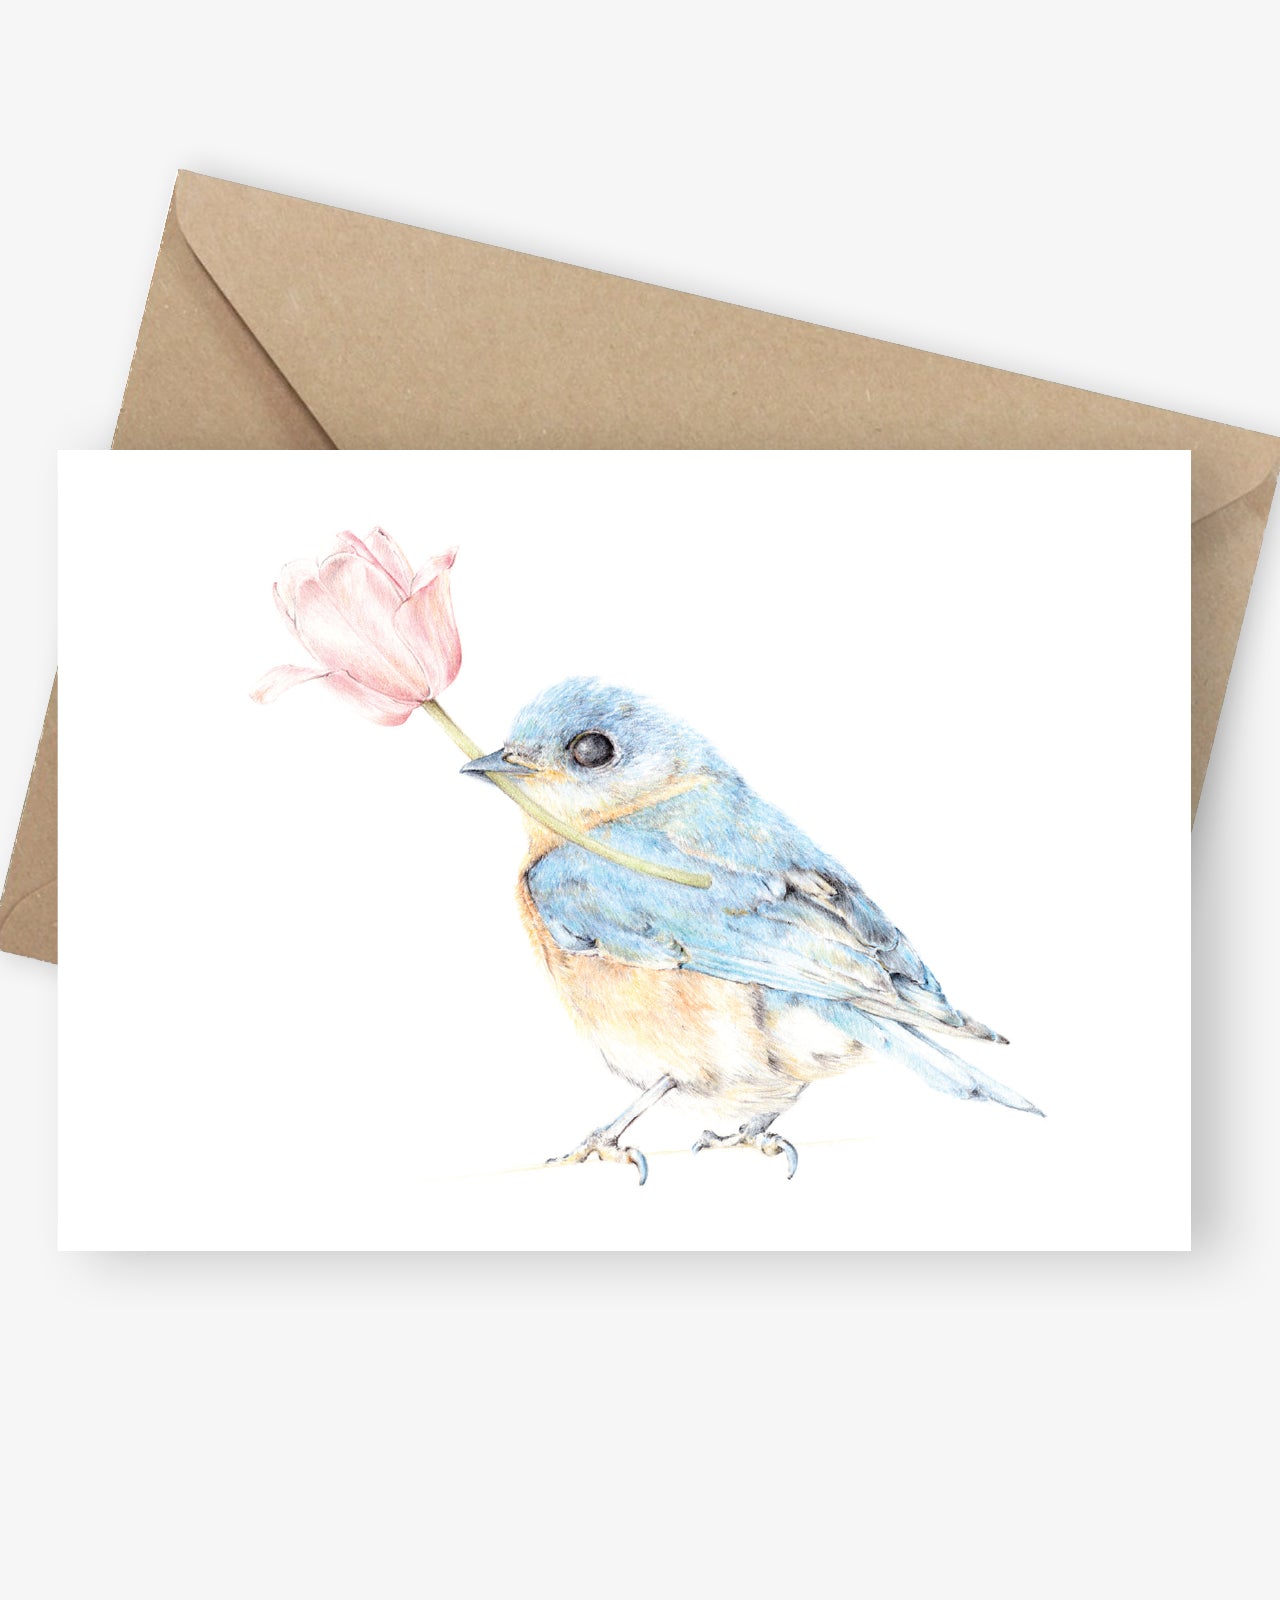 Greeting card featuring bluebird holding a pink magnolia flower.